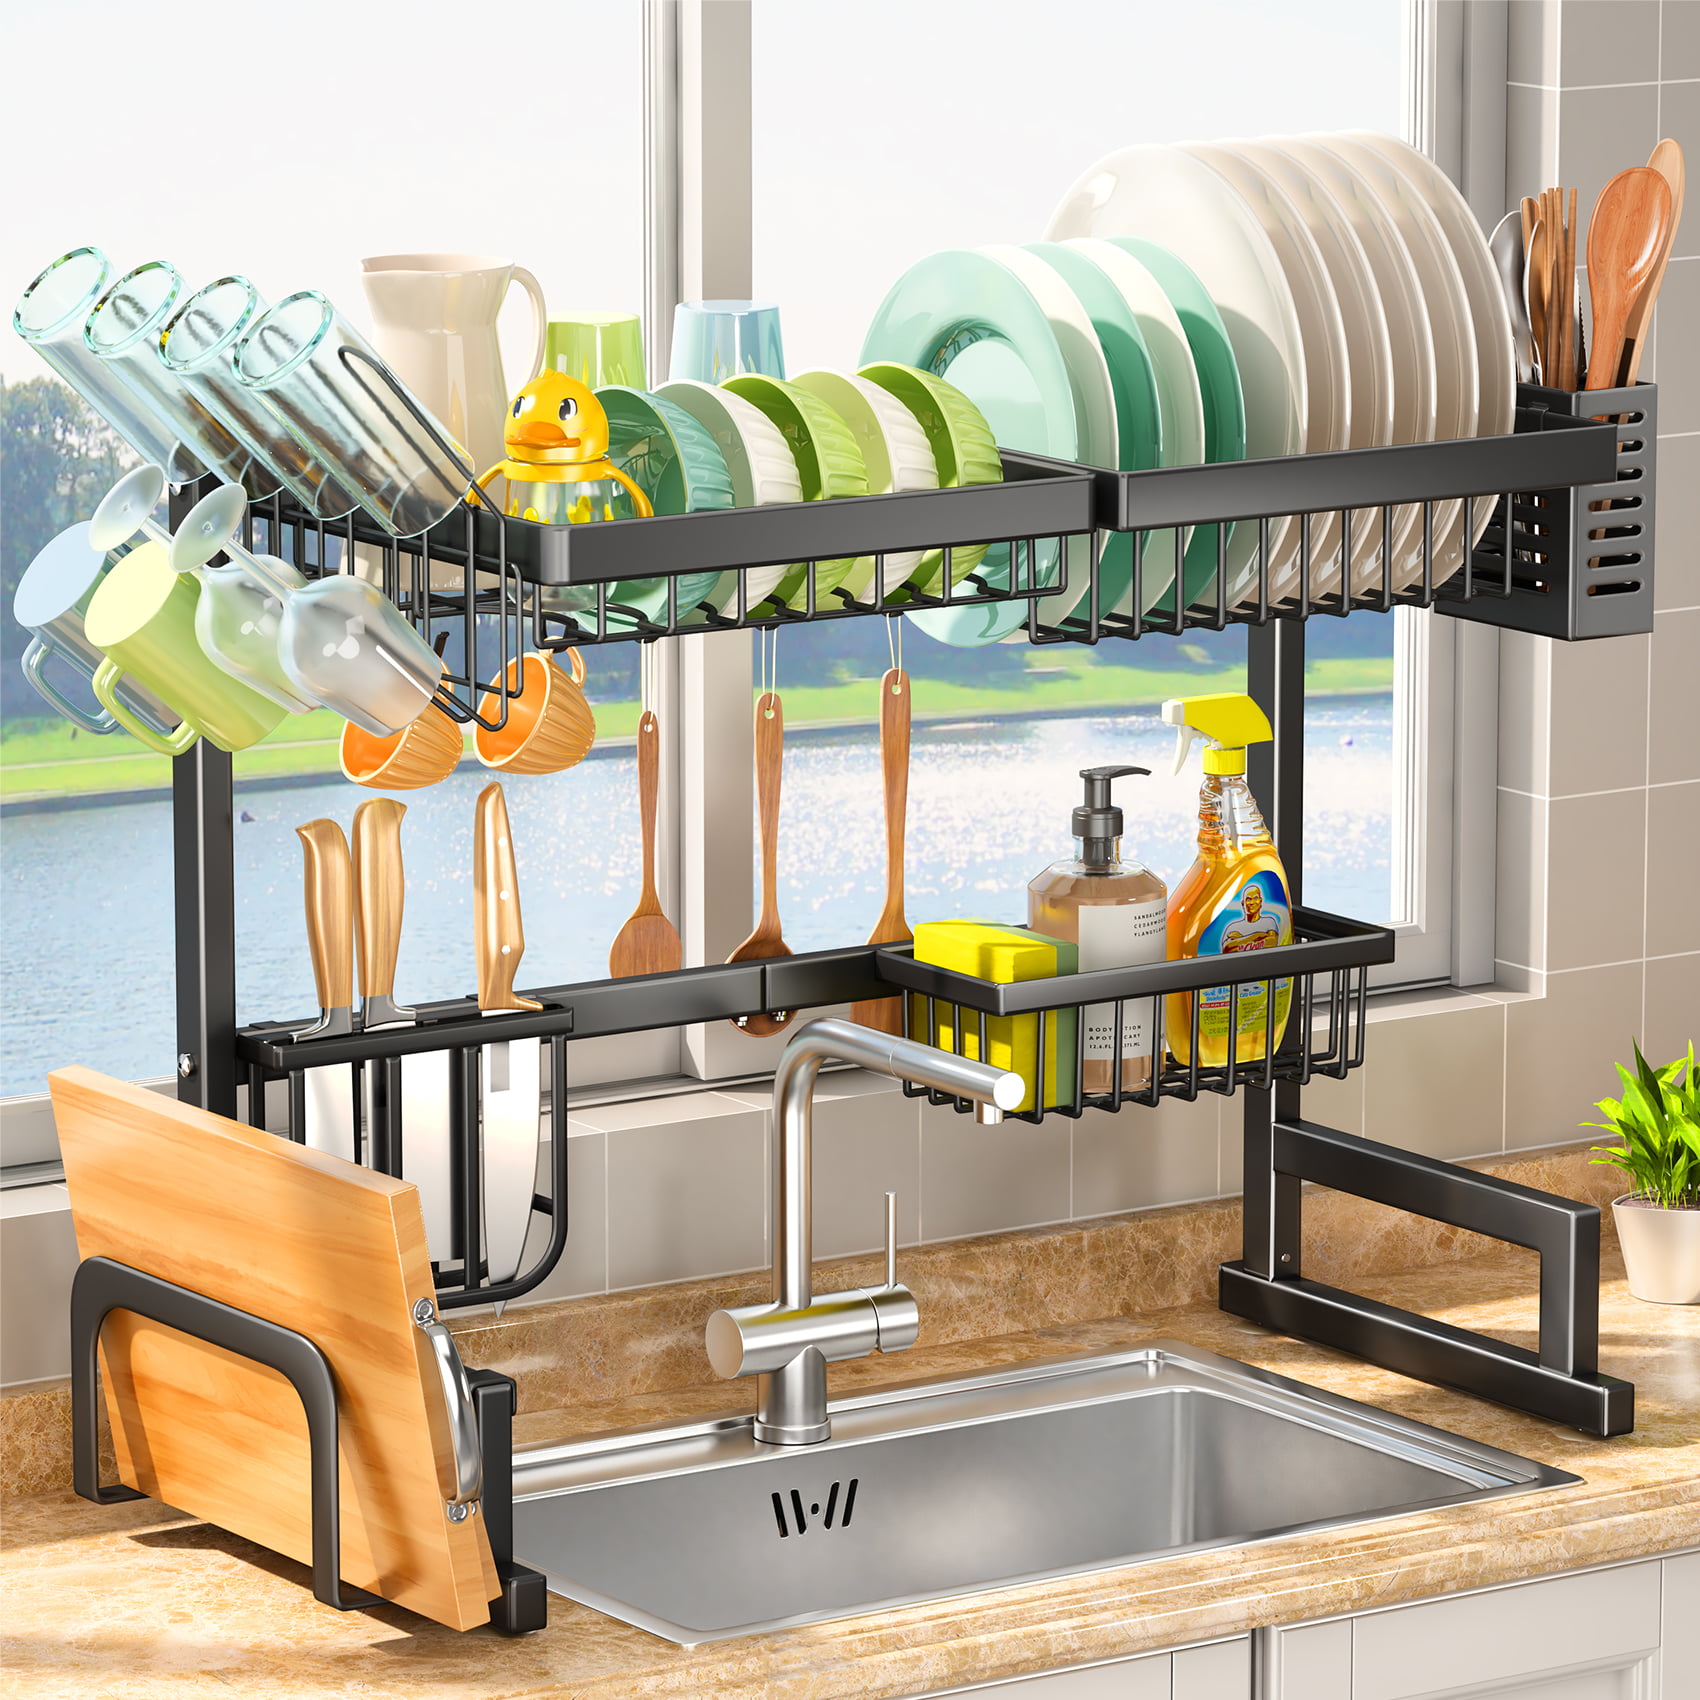 PUSDON Over Sink Dish Drying Rack (34-45) 3 Tier, 2 Cutlery Holders  Adjustable Dish Drainer for Kitchen Storage Countertop Organization,  Stainless